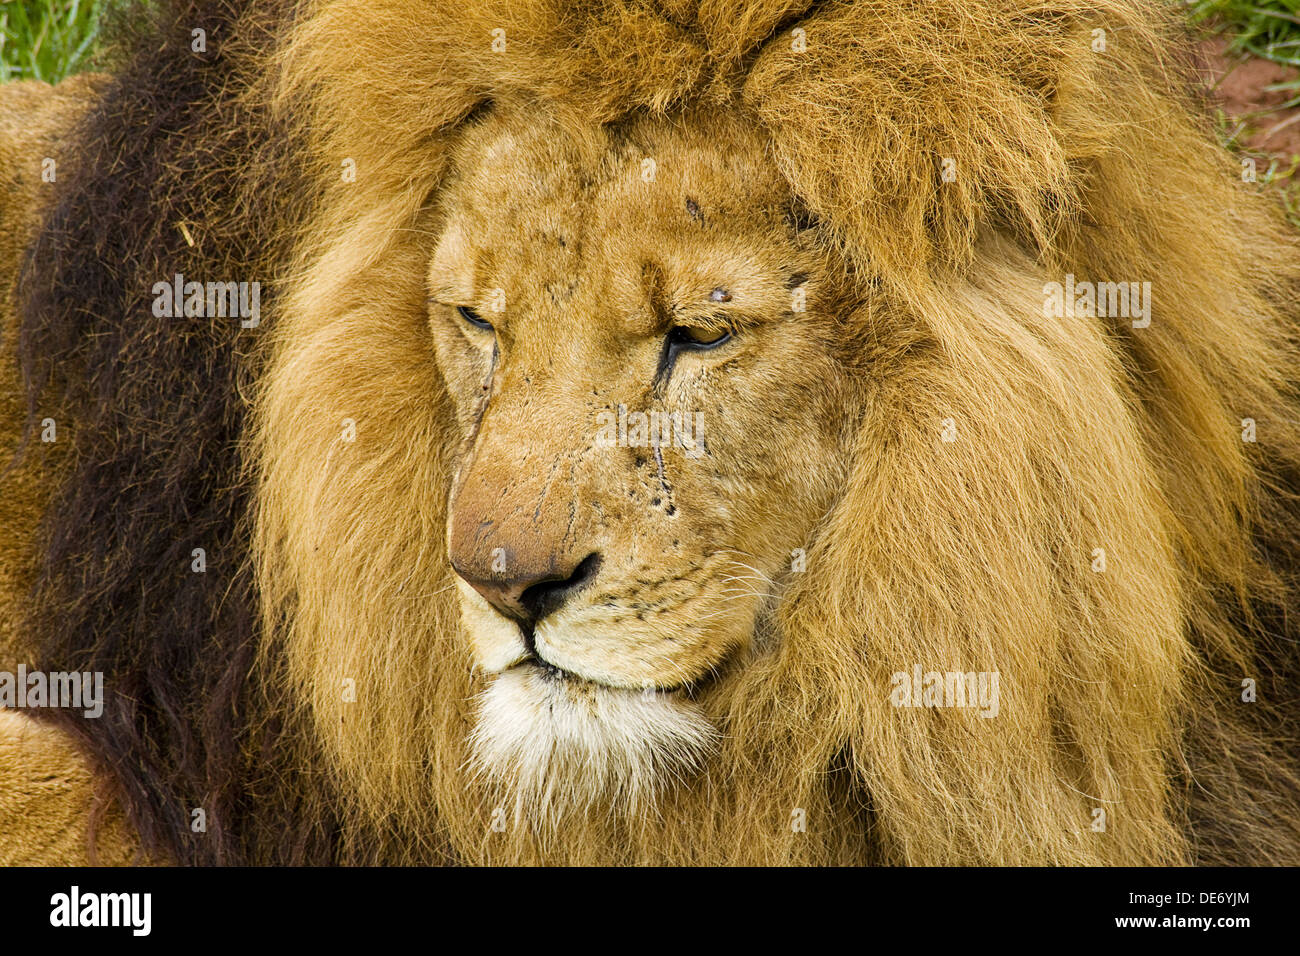 Close up head shot of a male lion a big cat the king of the jungle, with scars from fights Stock Photo